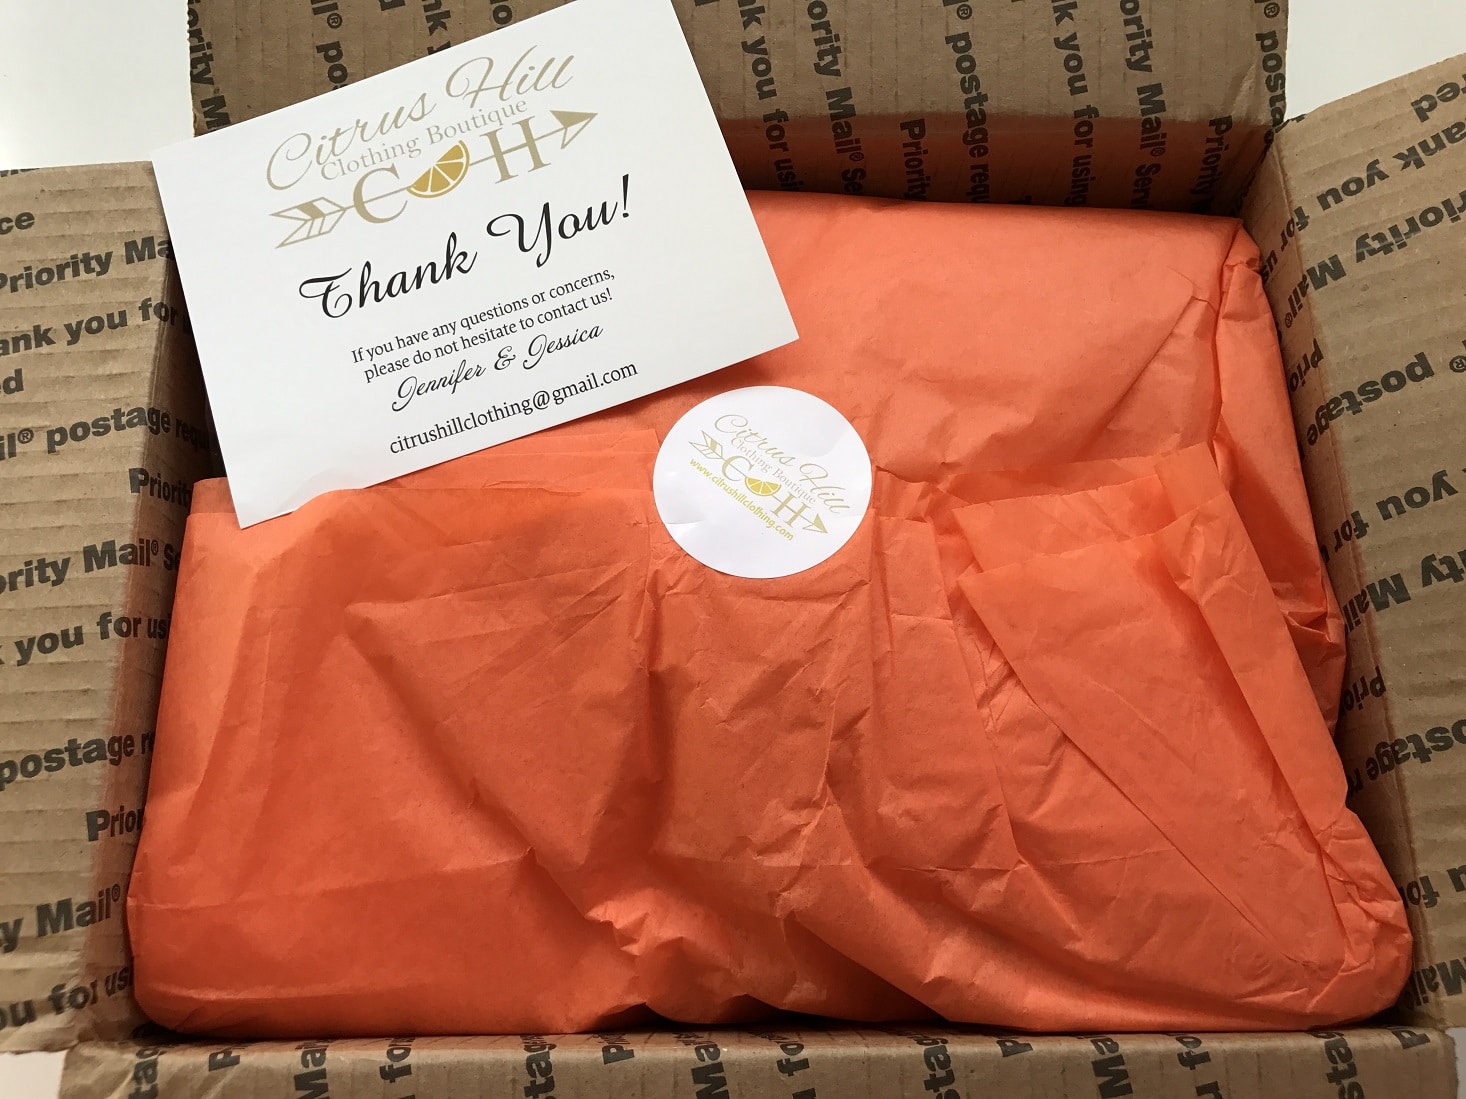 Citrus Hill Clothing Mystery Box Review – Fun Pool